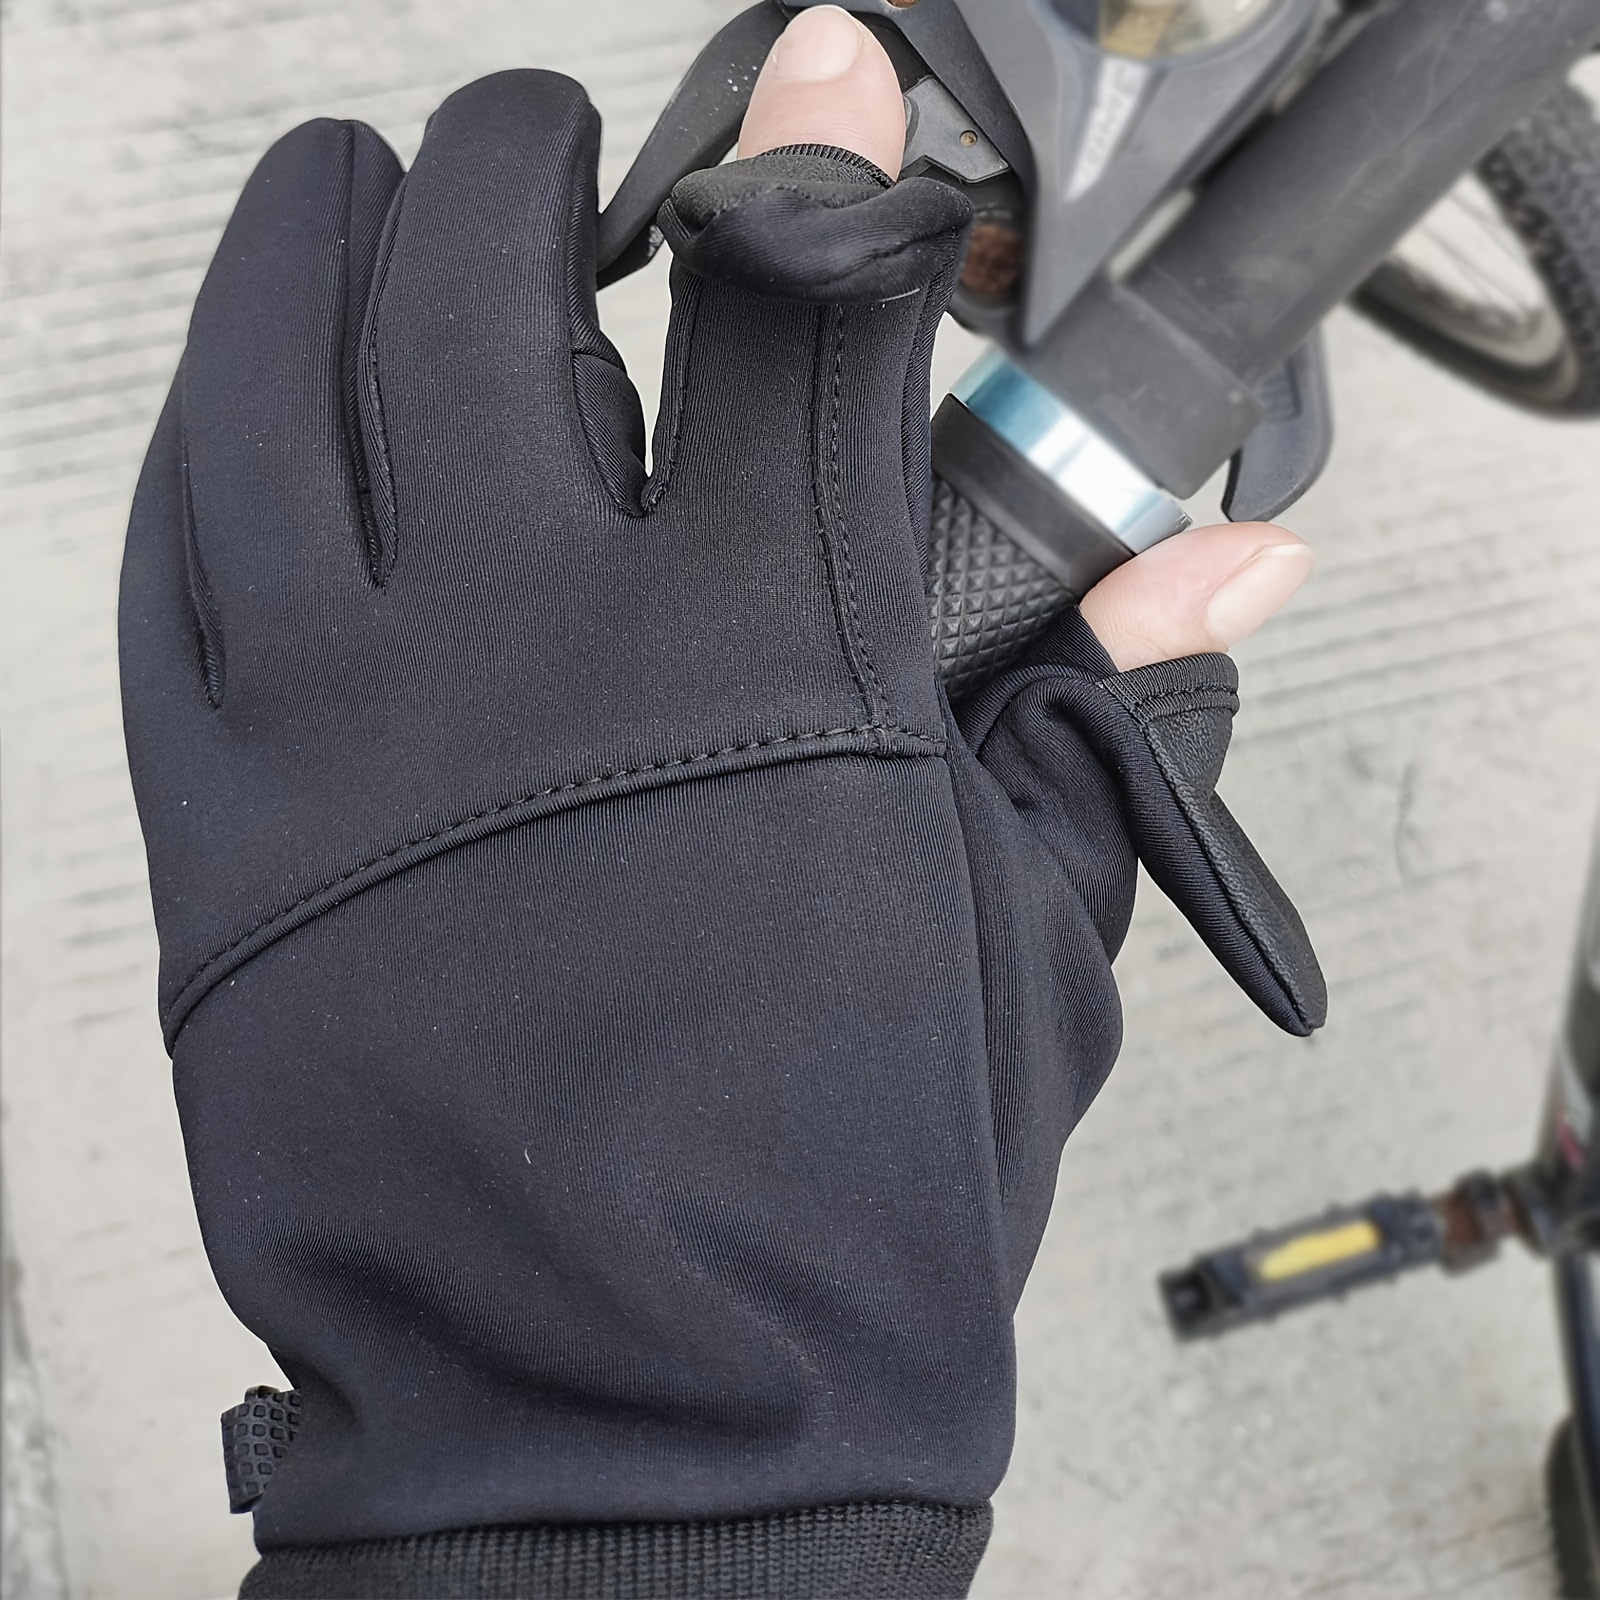 1pair Winter Fingerless Gloves For Cycling Fishing Windproof Cold